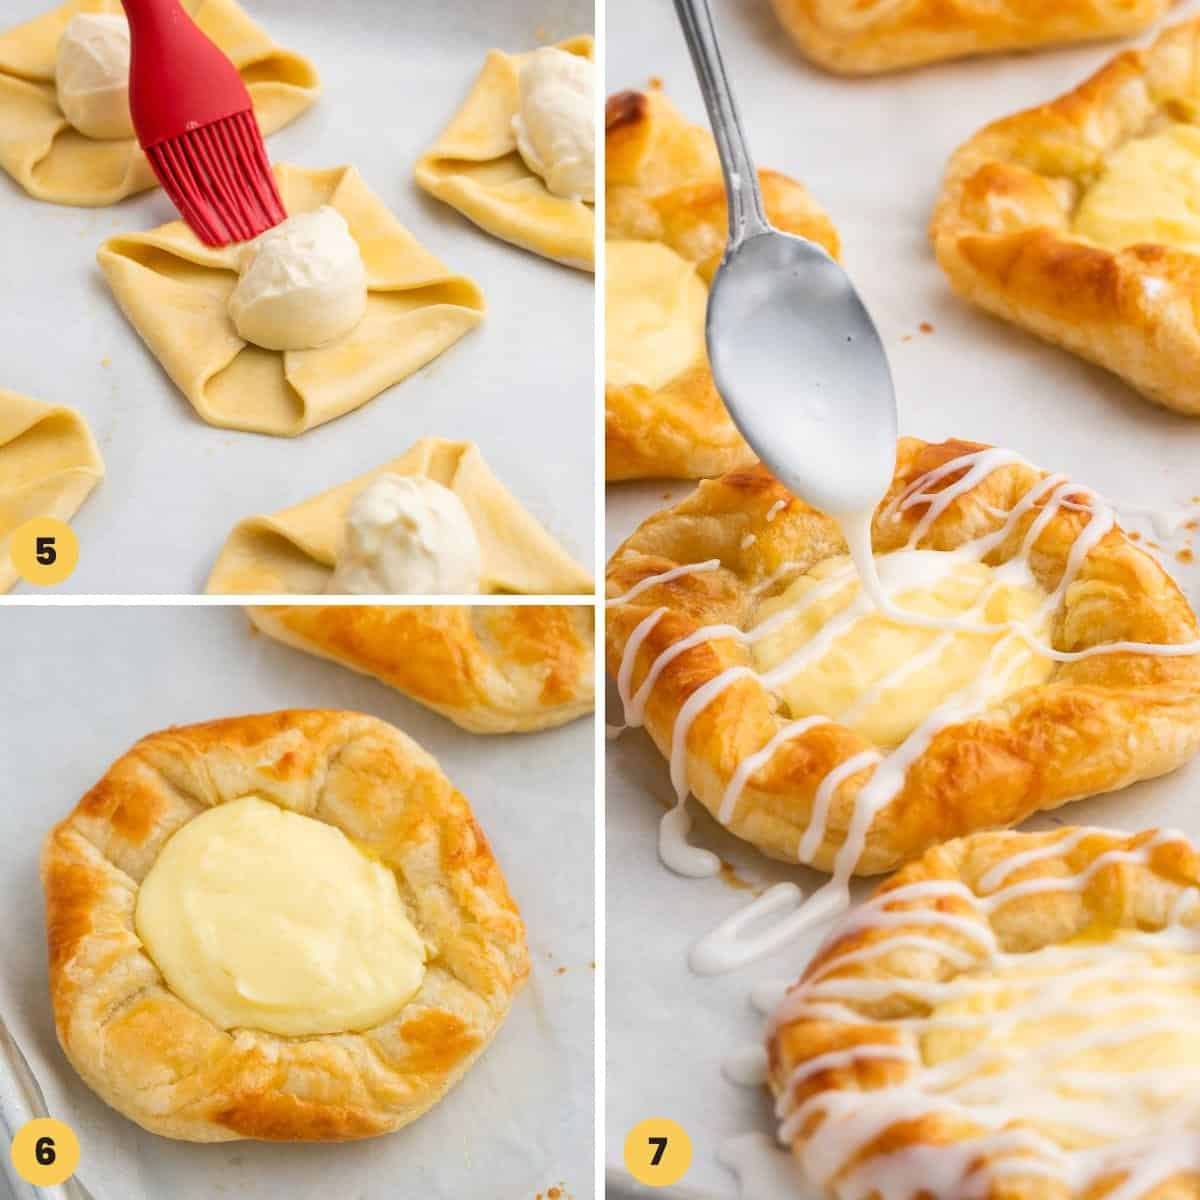 A collage of three images showing how to form, bake, and decorate cheese danish.